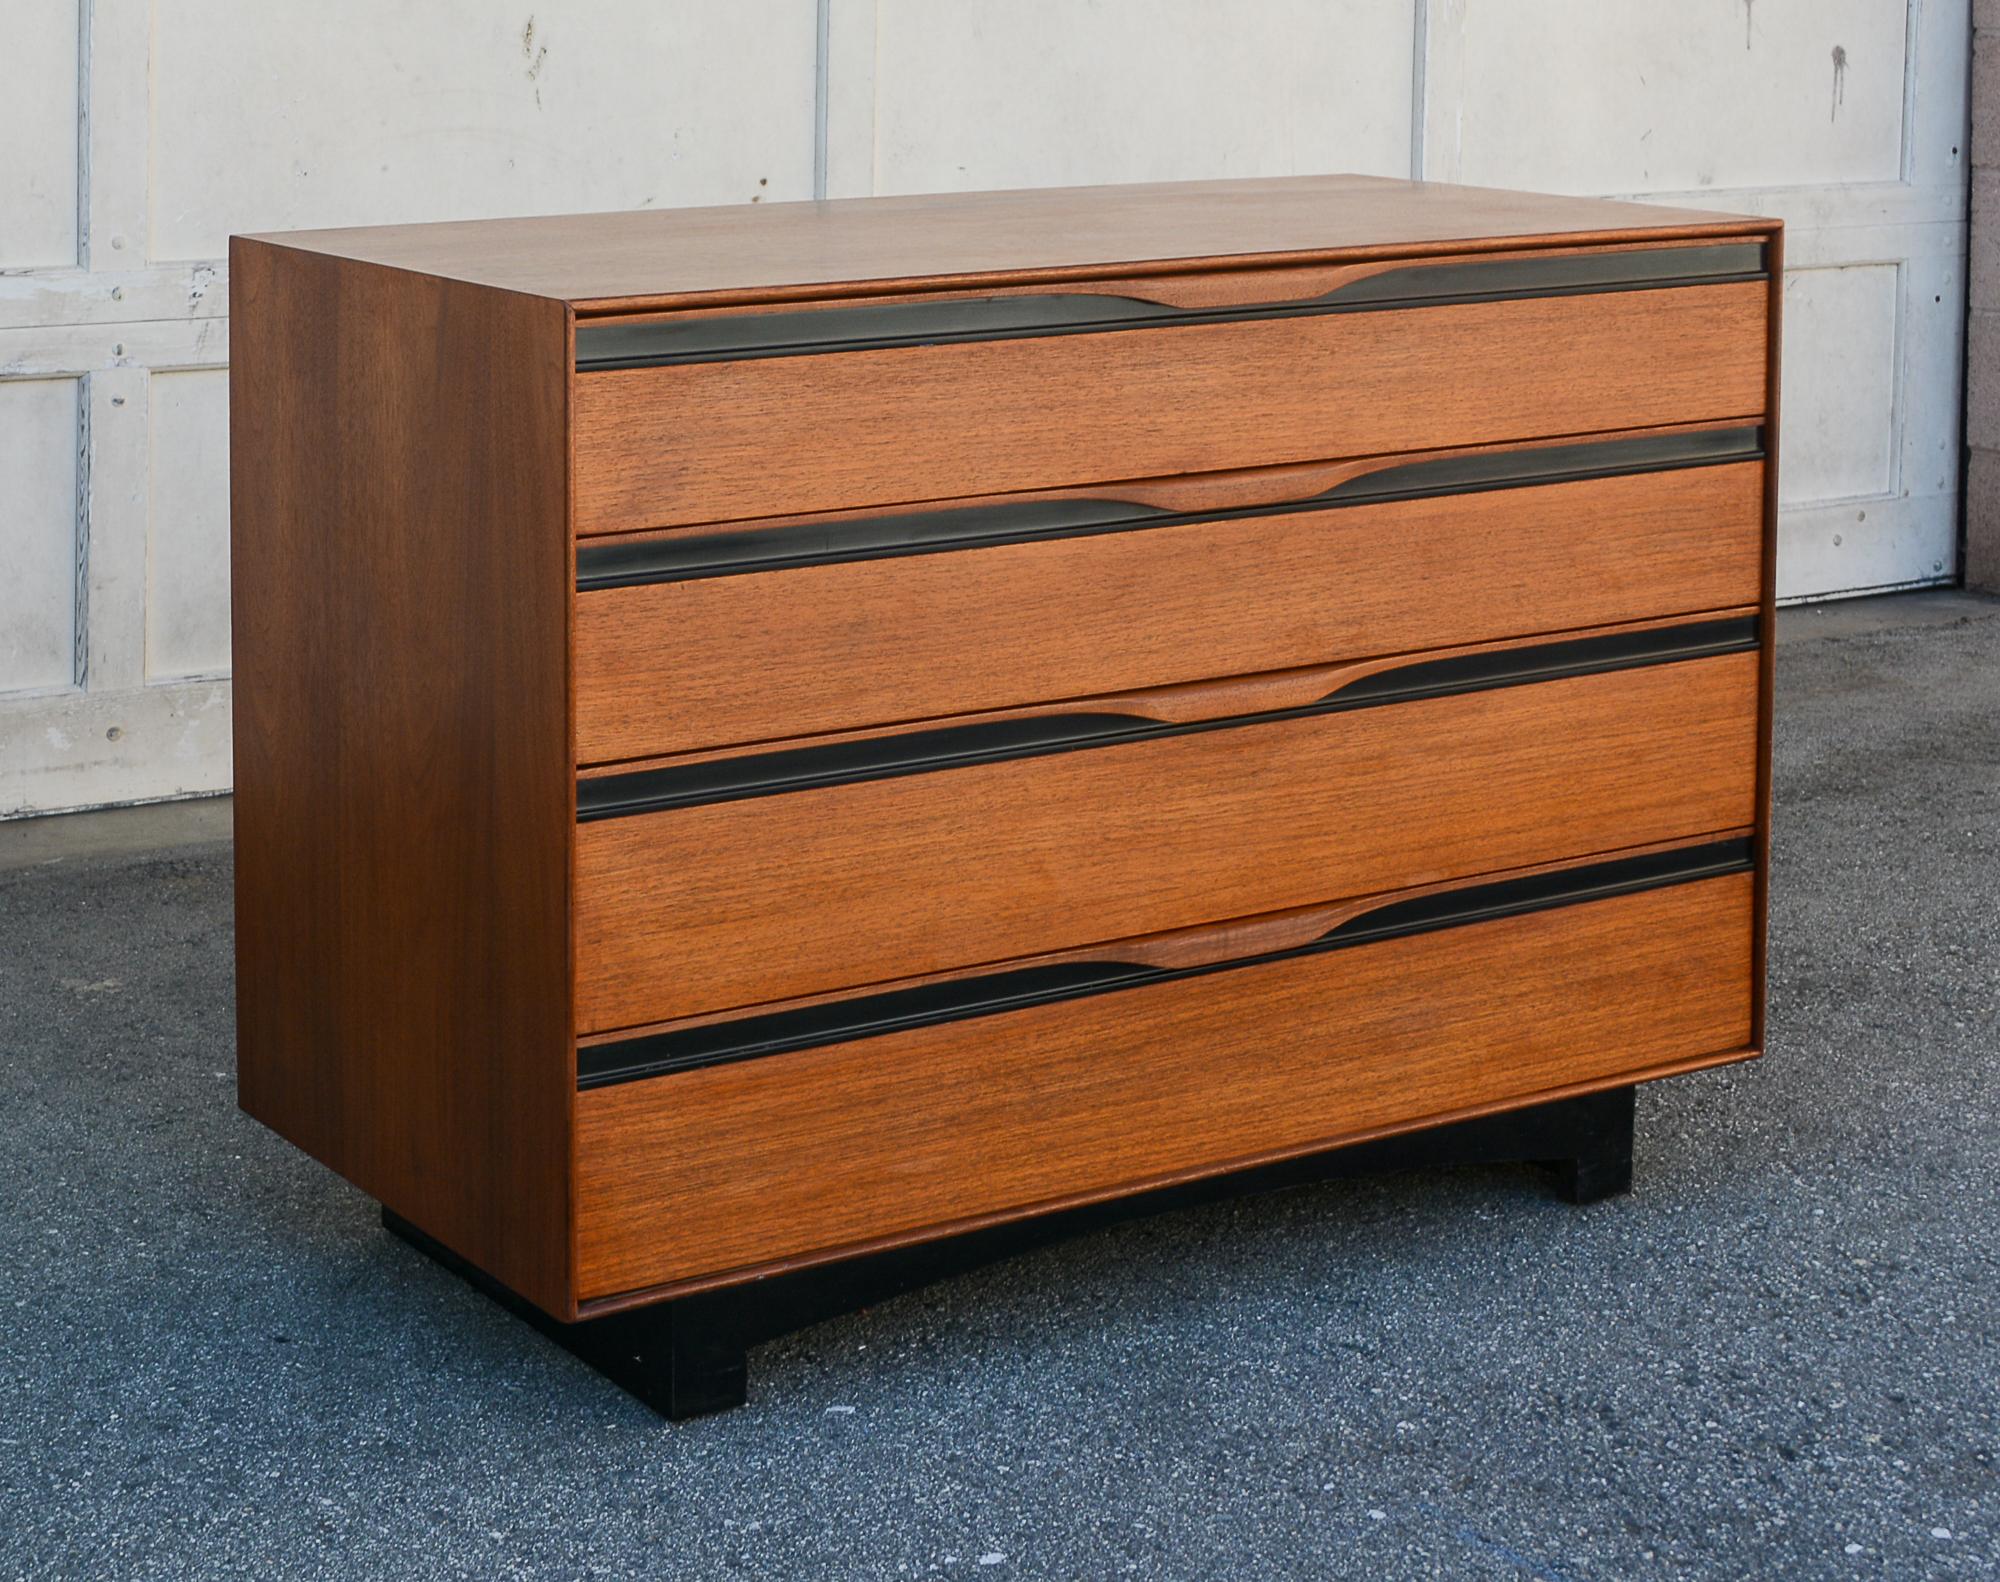 Small four drawer chest designed by John Kapel for Glenn of California. The chest is walnut with a black laminate base and black plastic strips below the drawer pulls. The drawers open and close easily on steel slides. There are movable dividers in